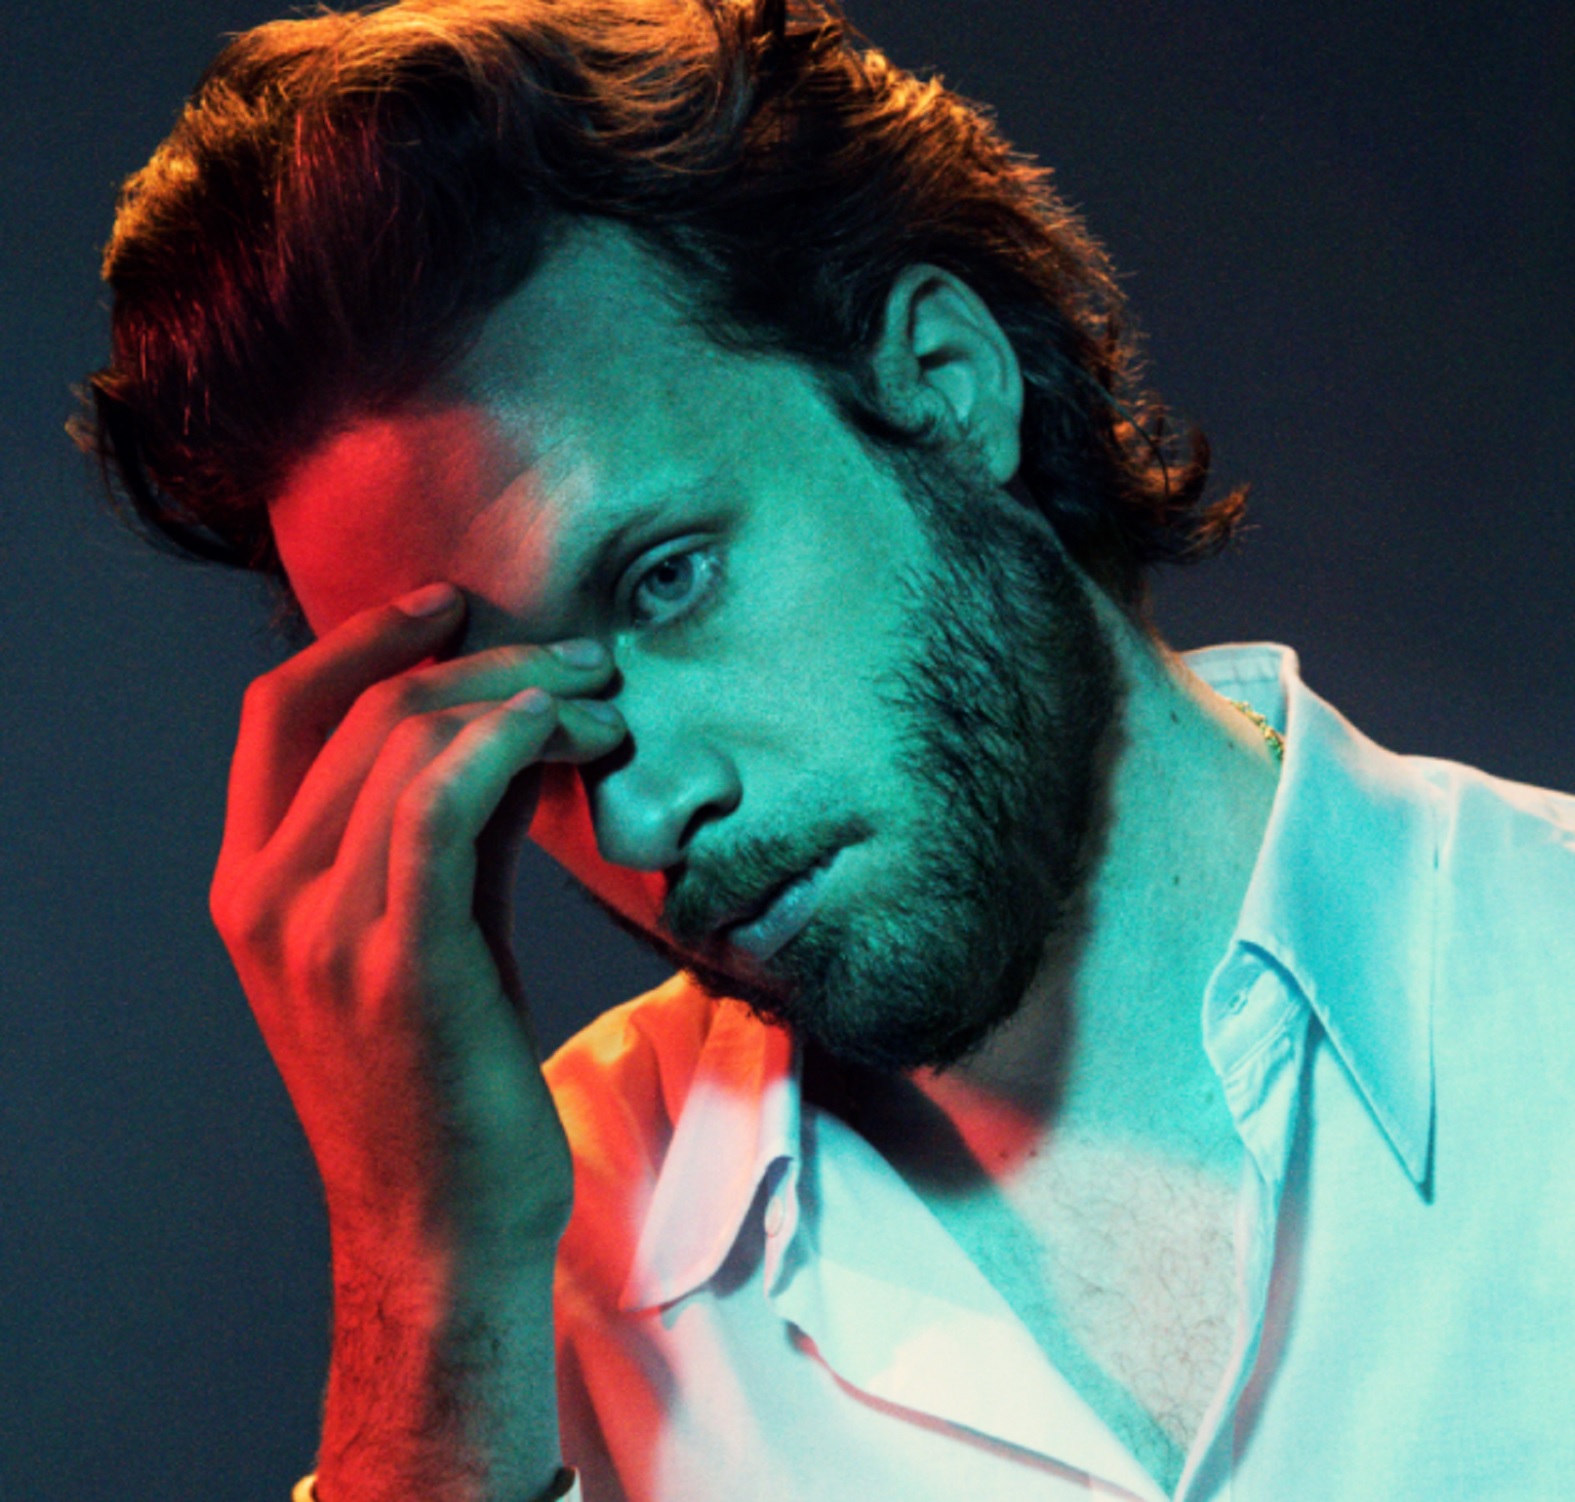 Father John Misty "Everything Is Free" (Recorded at Spotify version) GMA